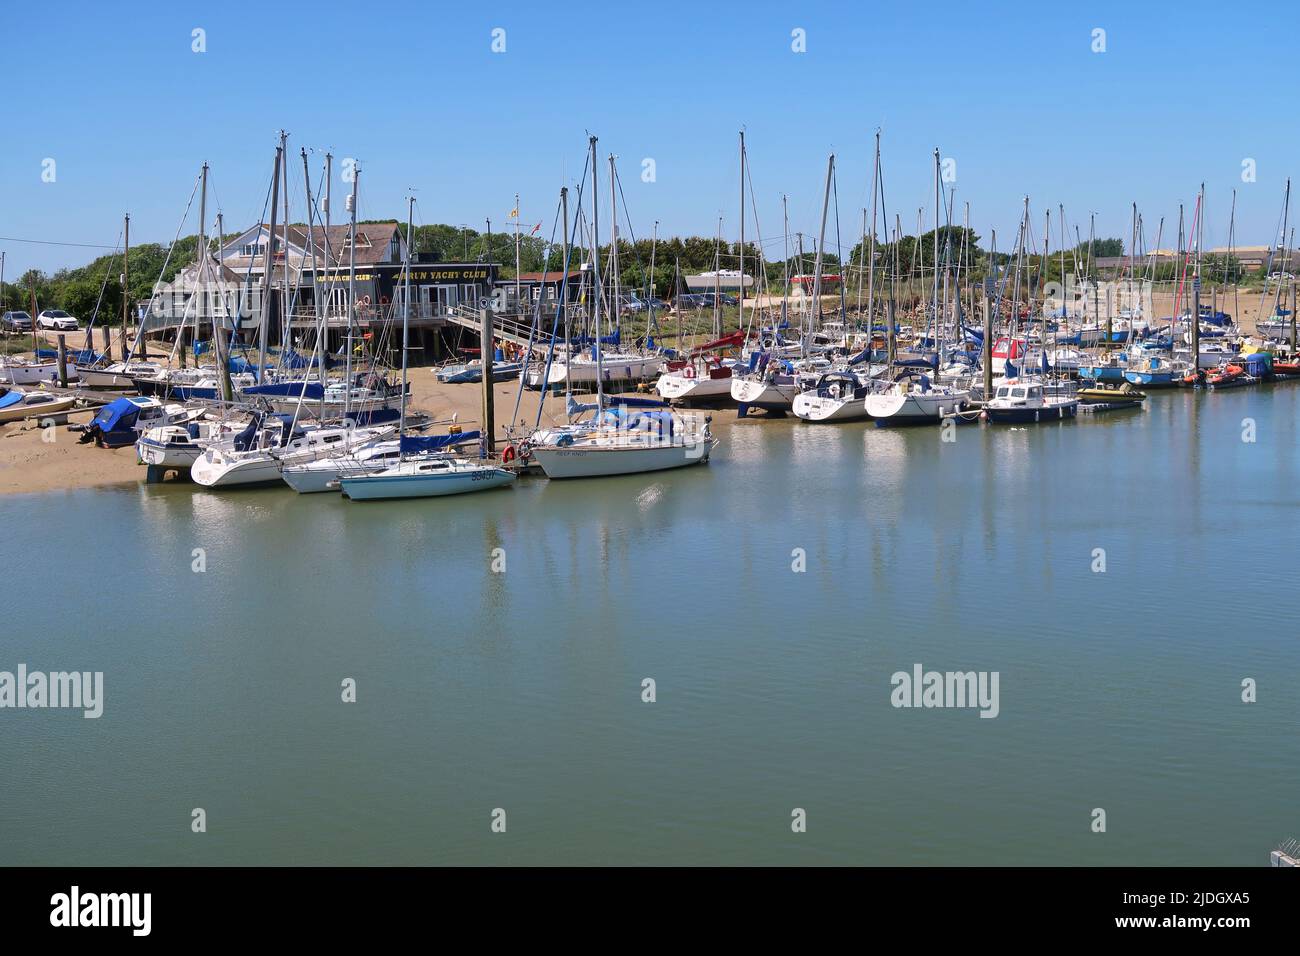 Littlempton, West Sussex, UK. Arun Yacht Club. Clubhouse sits amongst sand dunes on west bank of the River Arun. Yachts moored at floating pontoons. Stock Photo